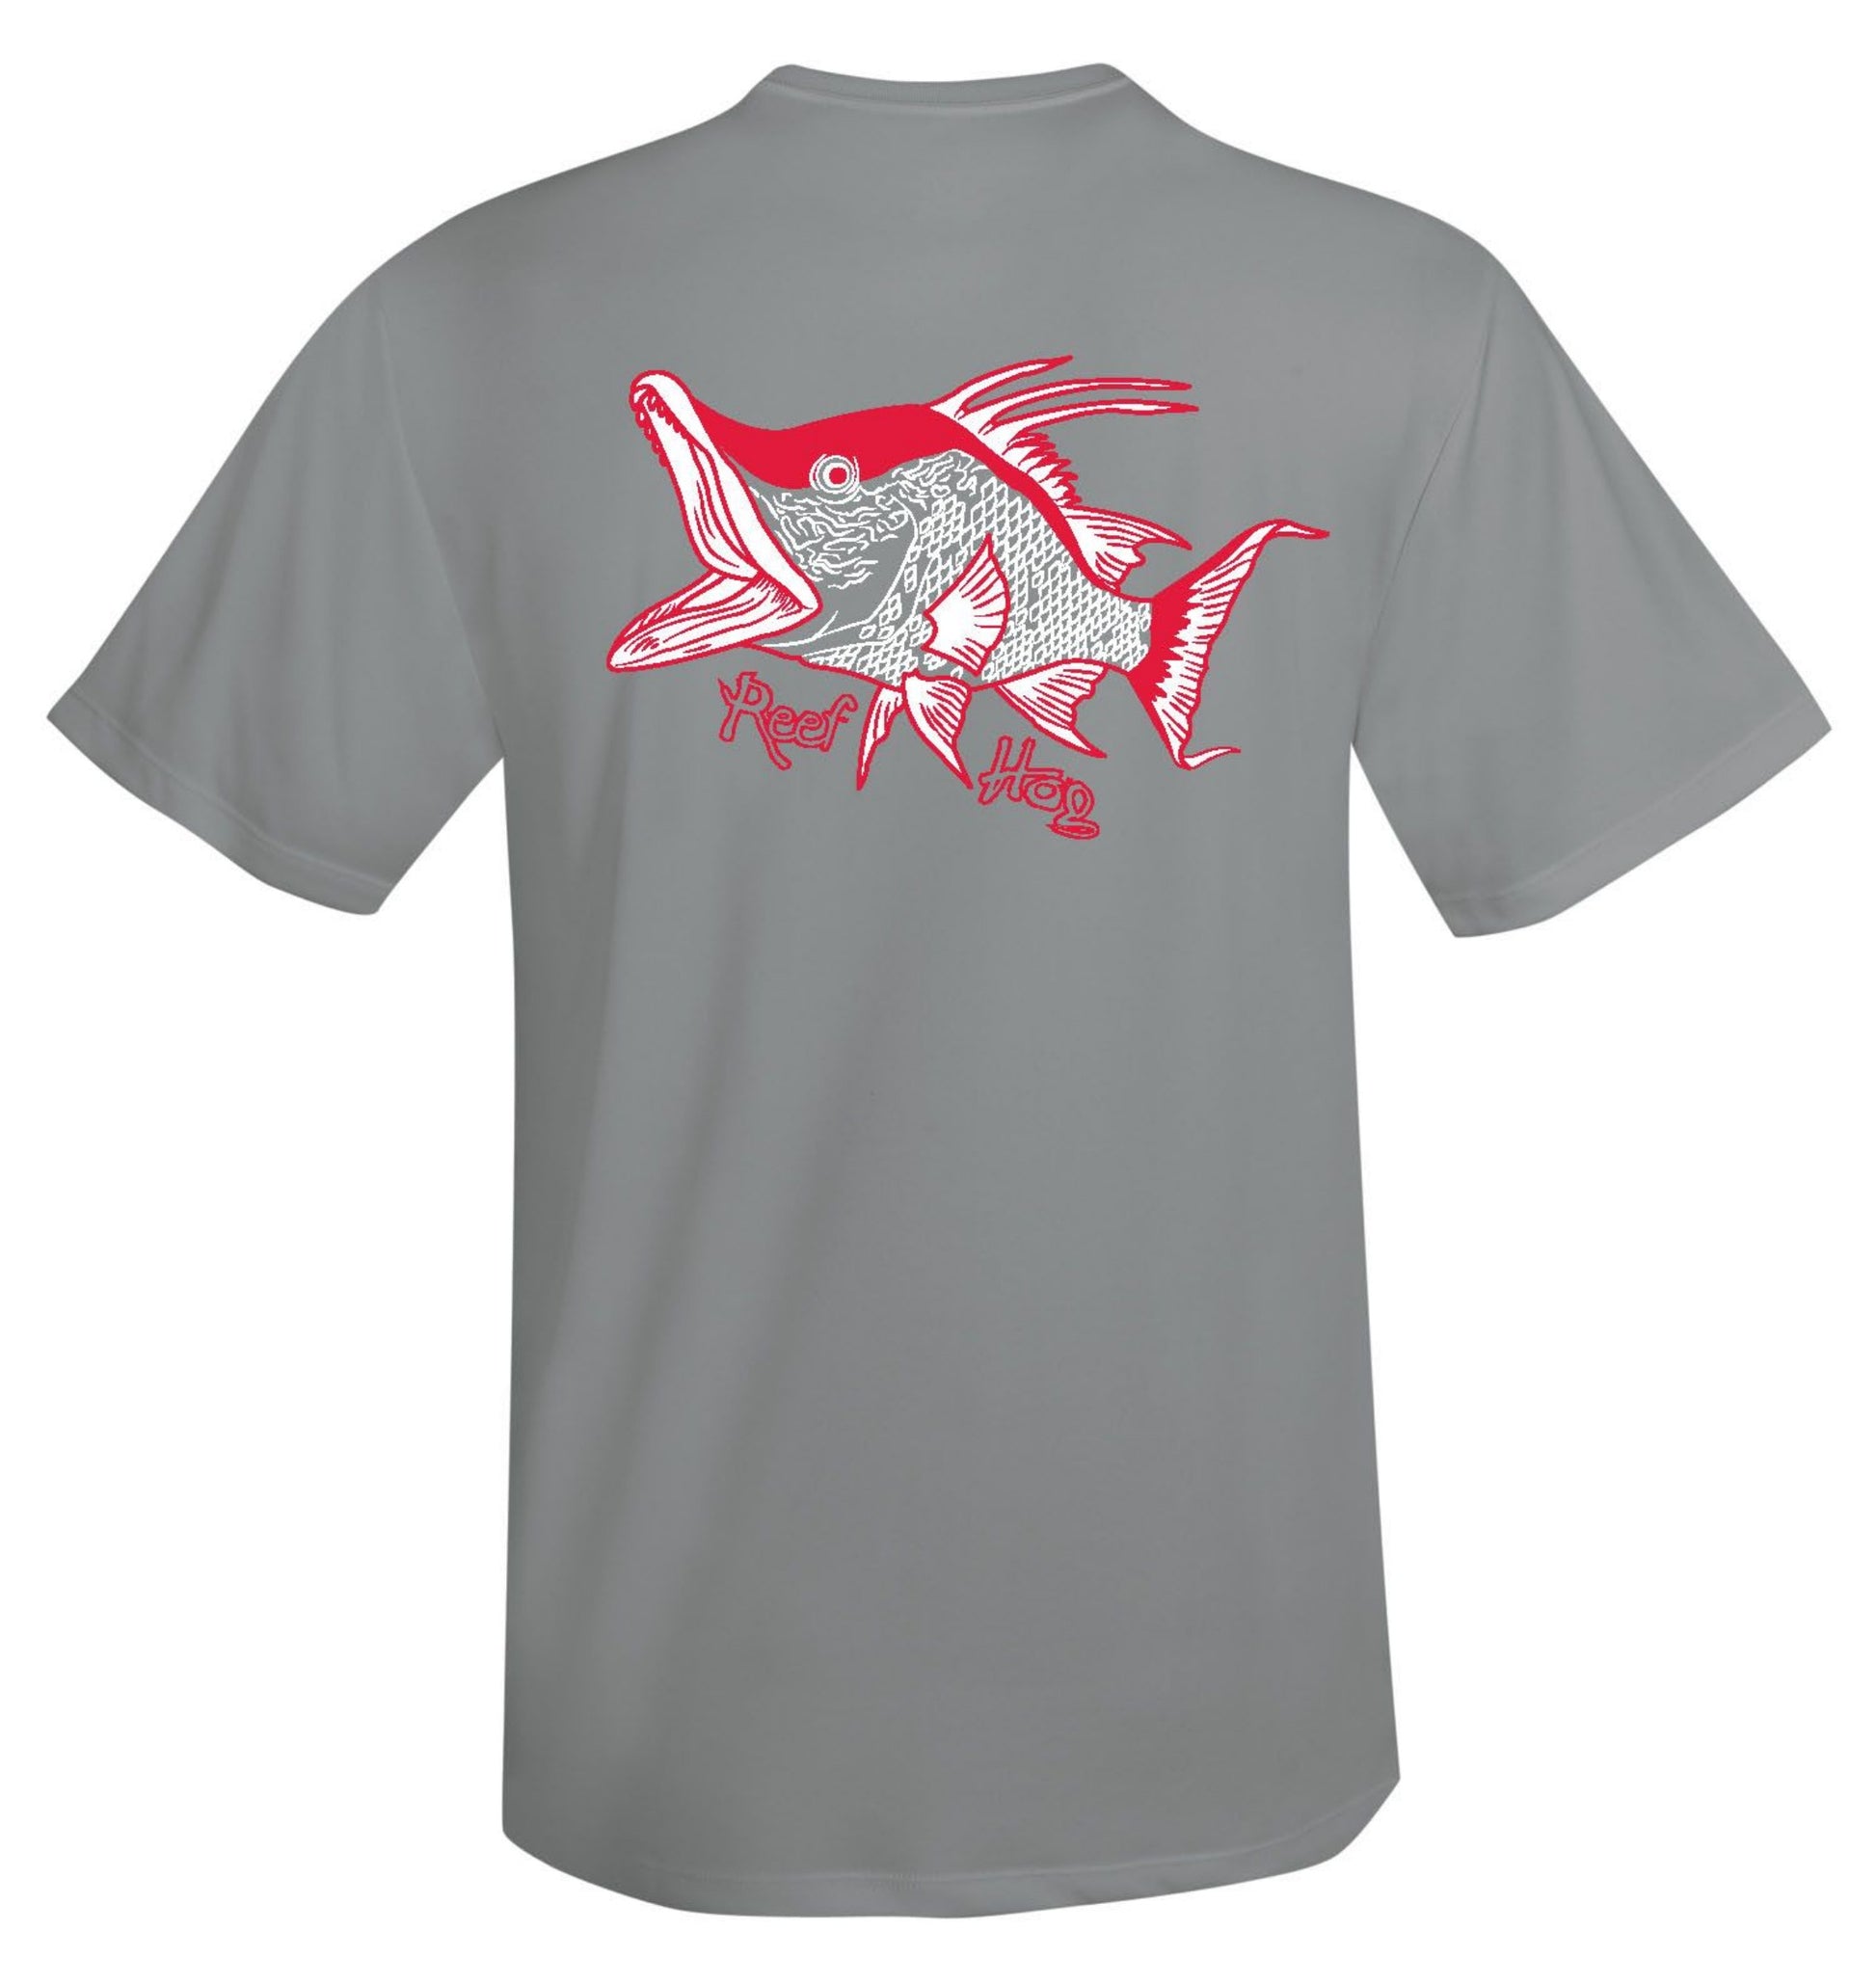 Gray Short Sleeve Hogfish Performance Dry-Fit Sun Protection Shirt with 50+ UV Protection by Reel Fishy Apparel